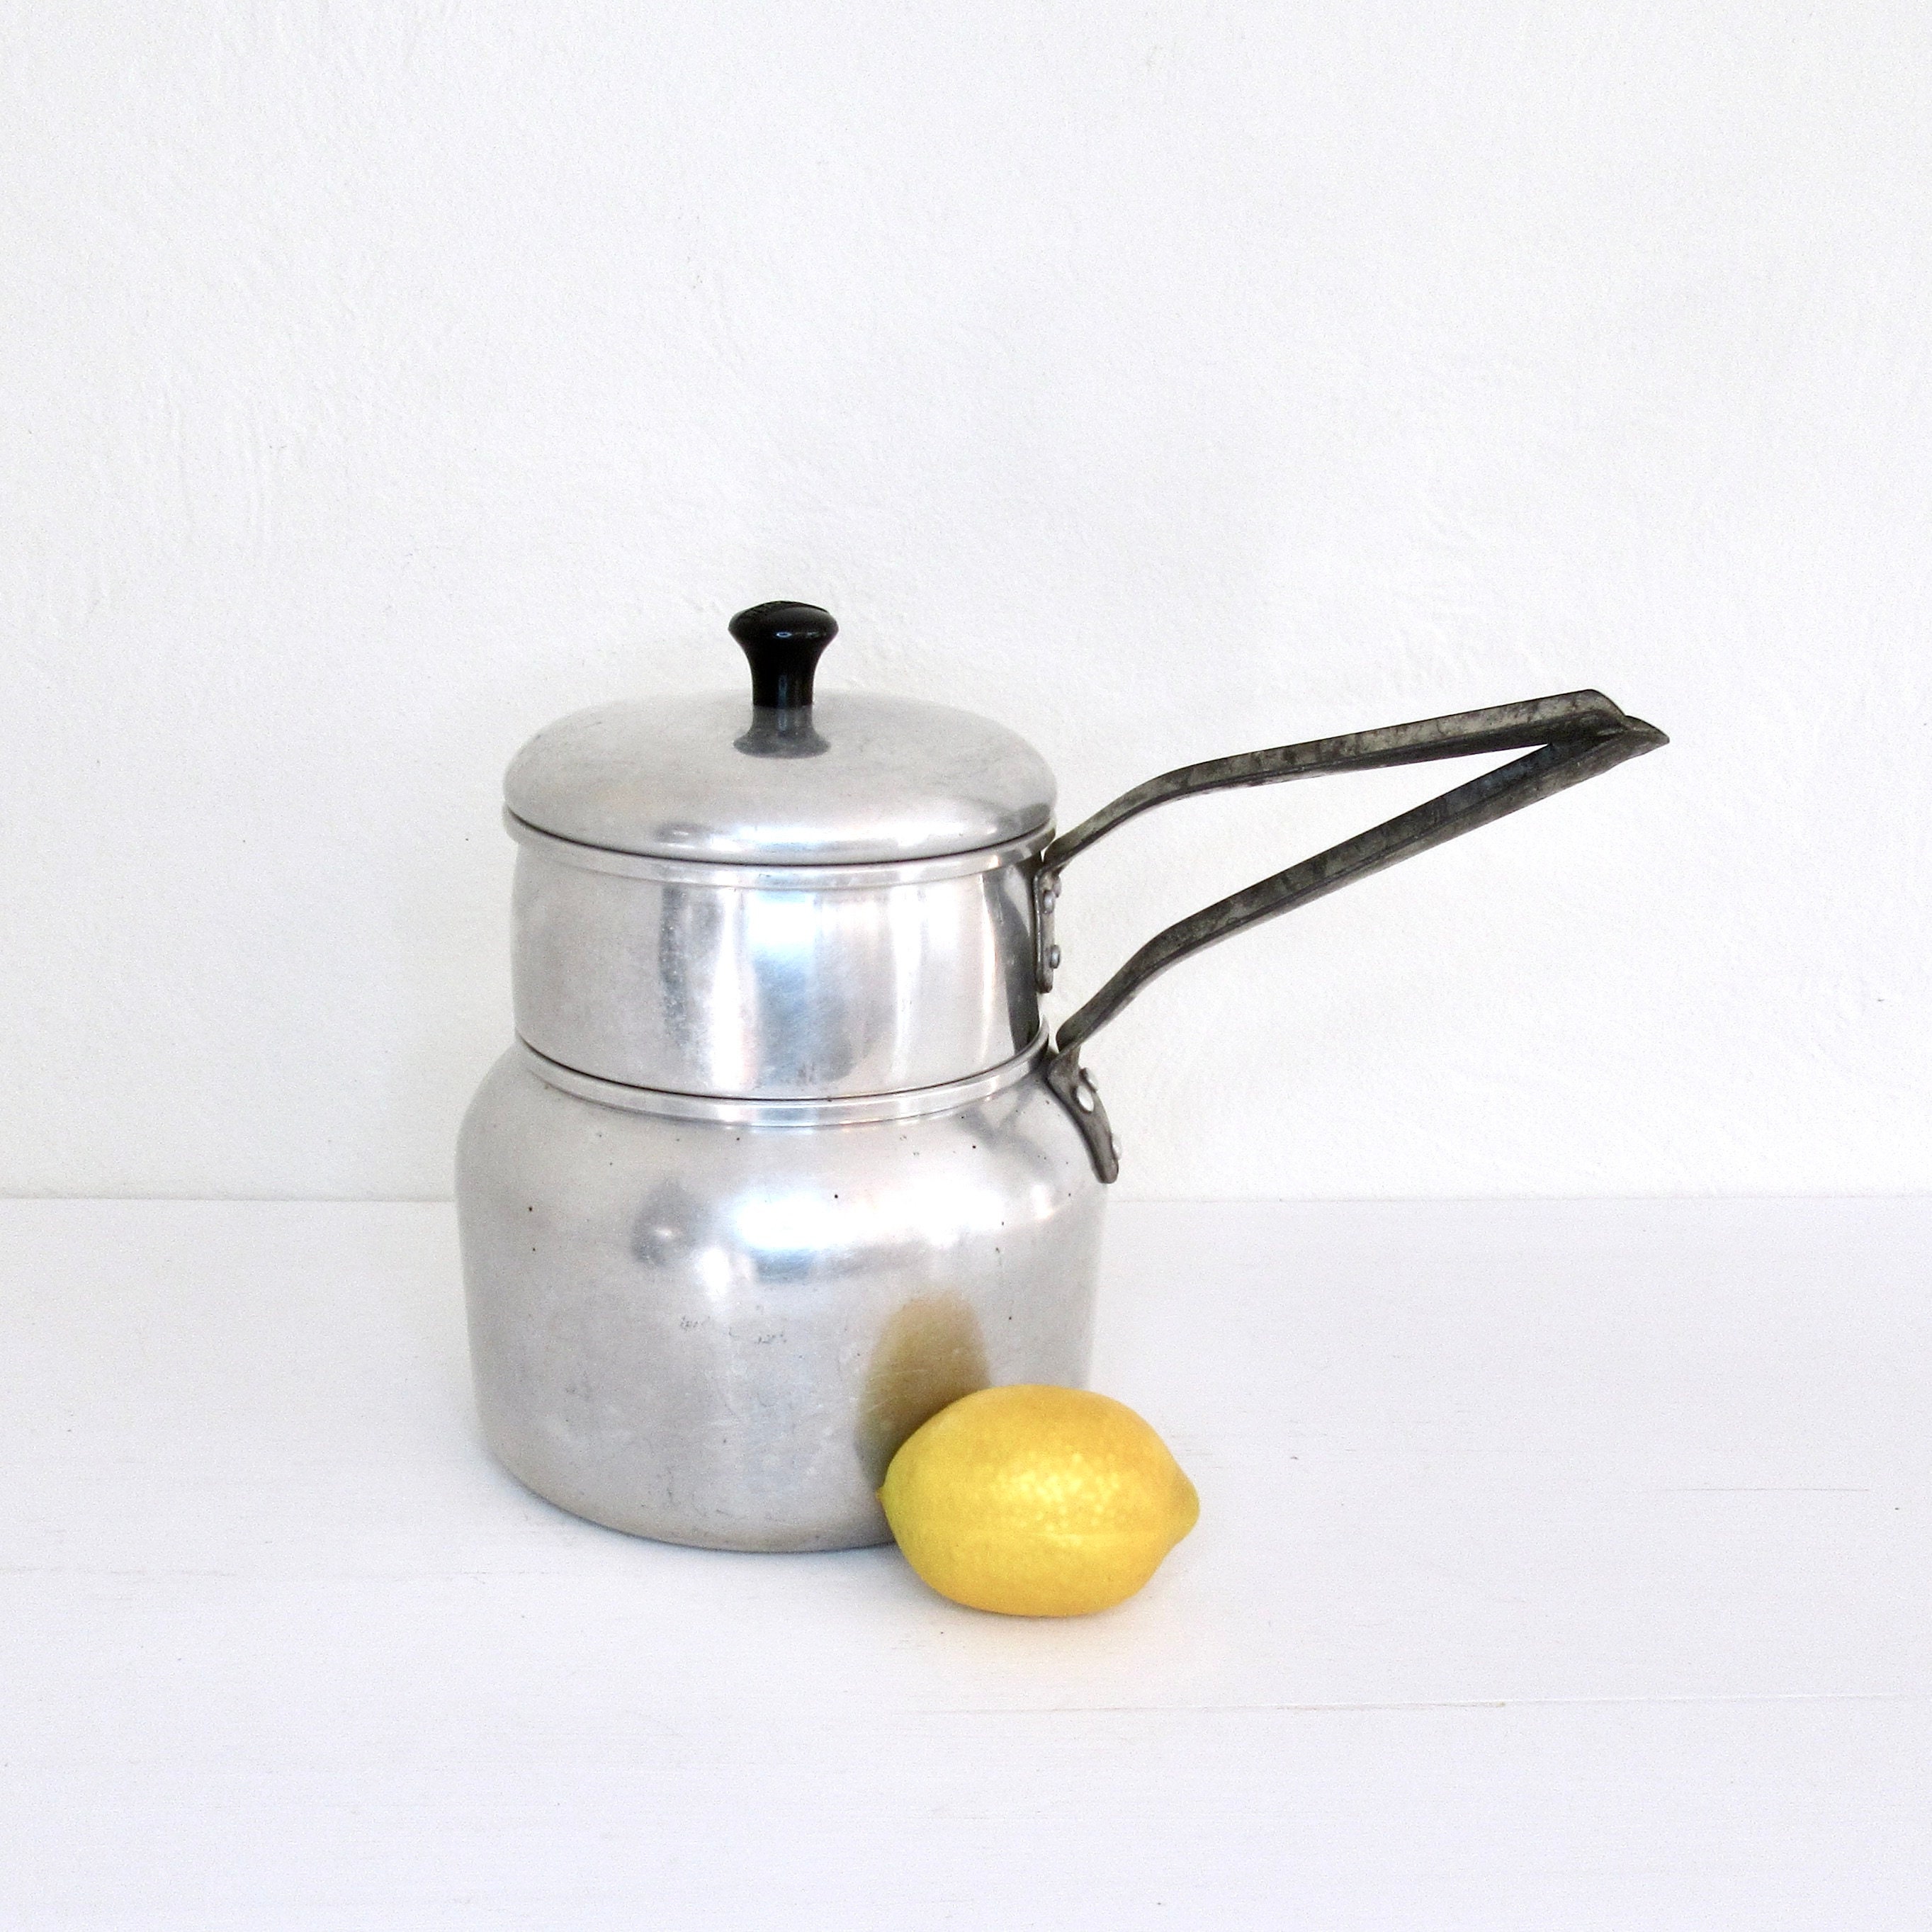 VintageRare :: Wear-Ever Aluminum Tea Kettle, Made in USA - collectibles -  by owner - sale - craigslist